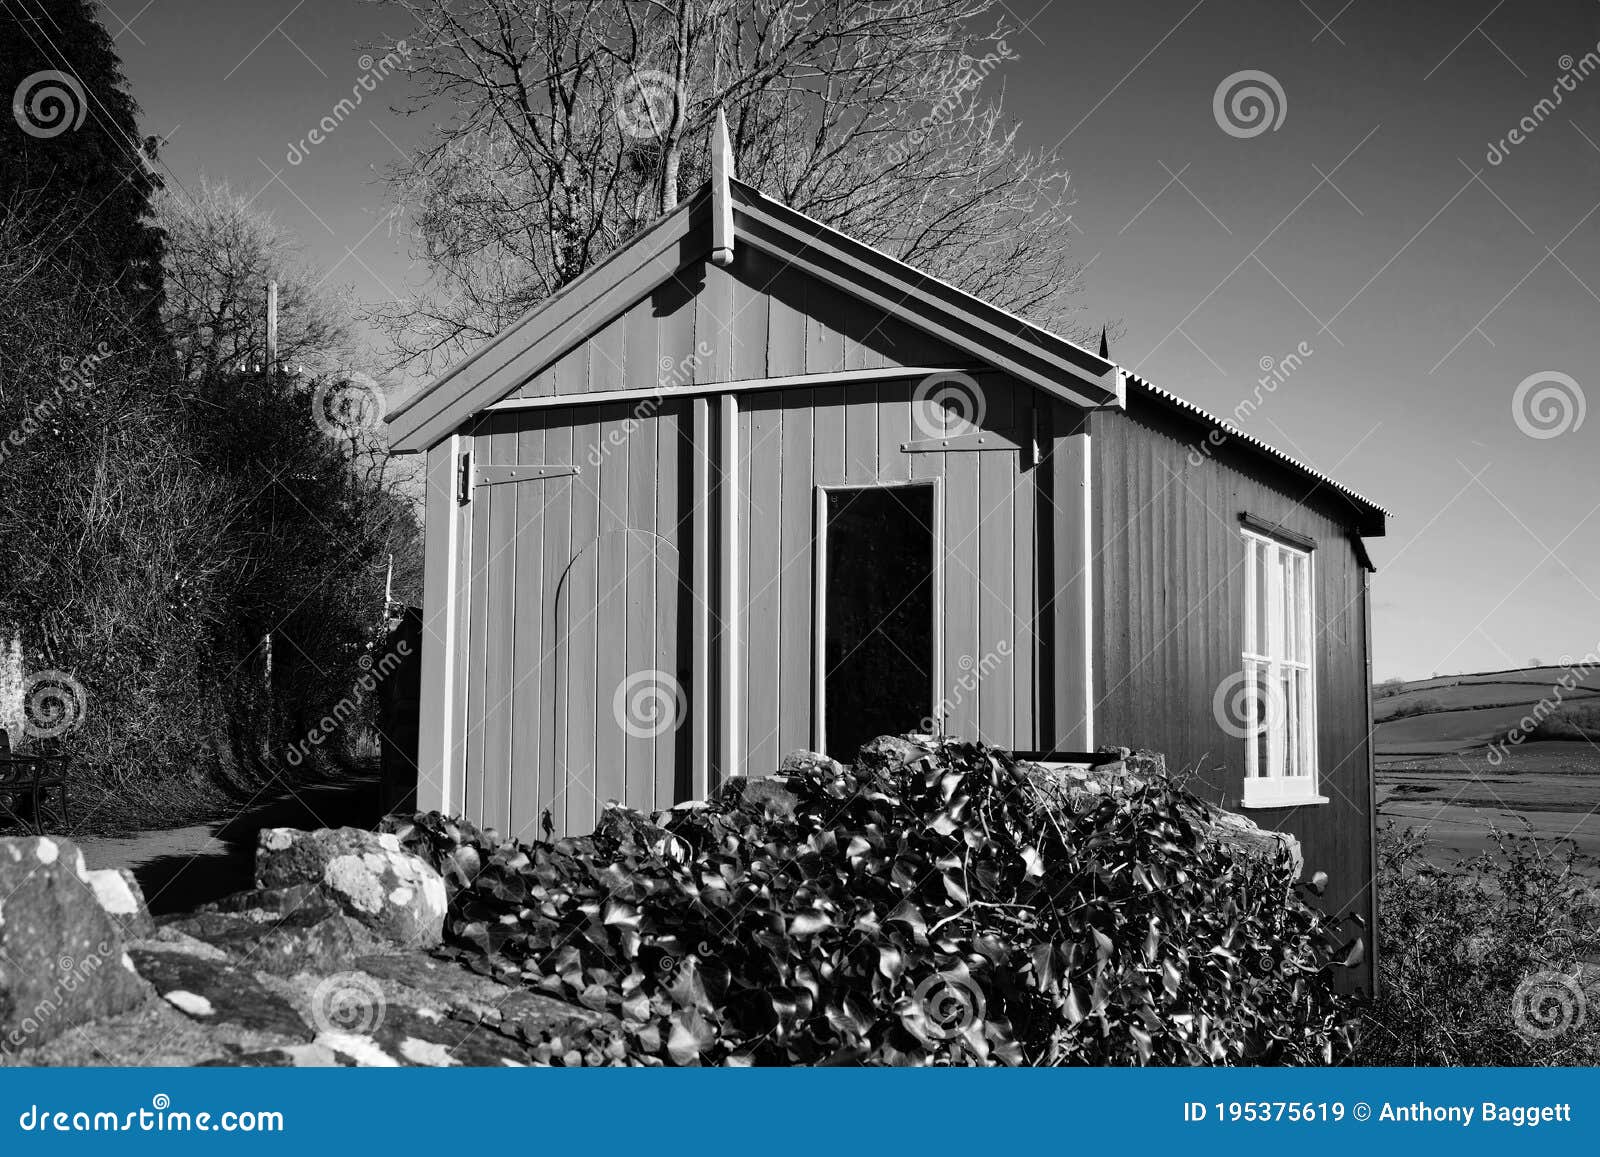 dylan thomas poet writer writing shed laugharne carmarthenshire south wales